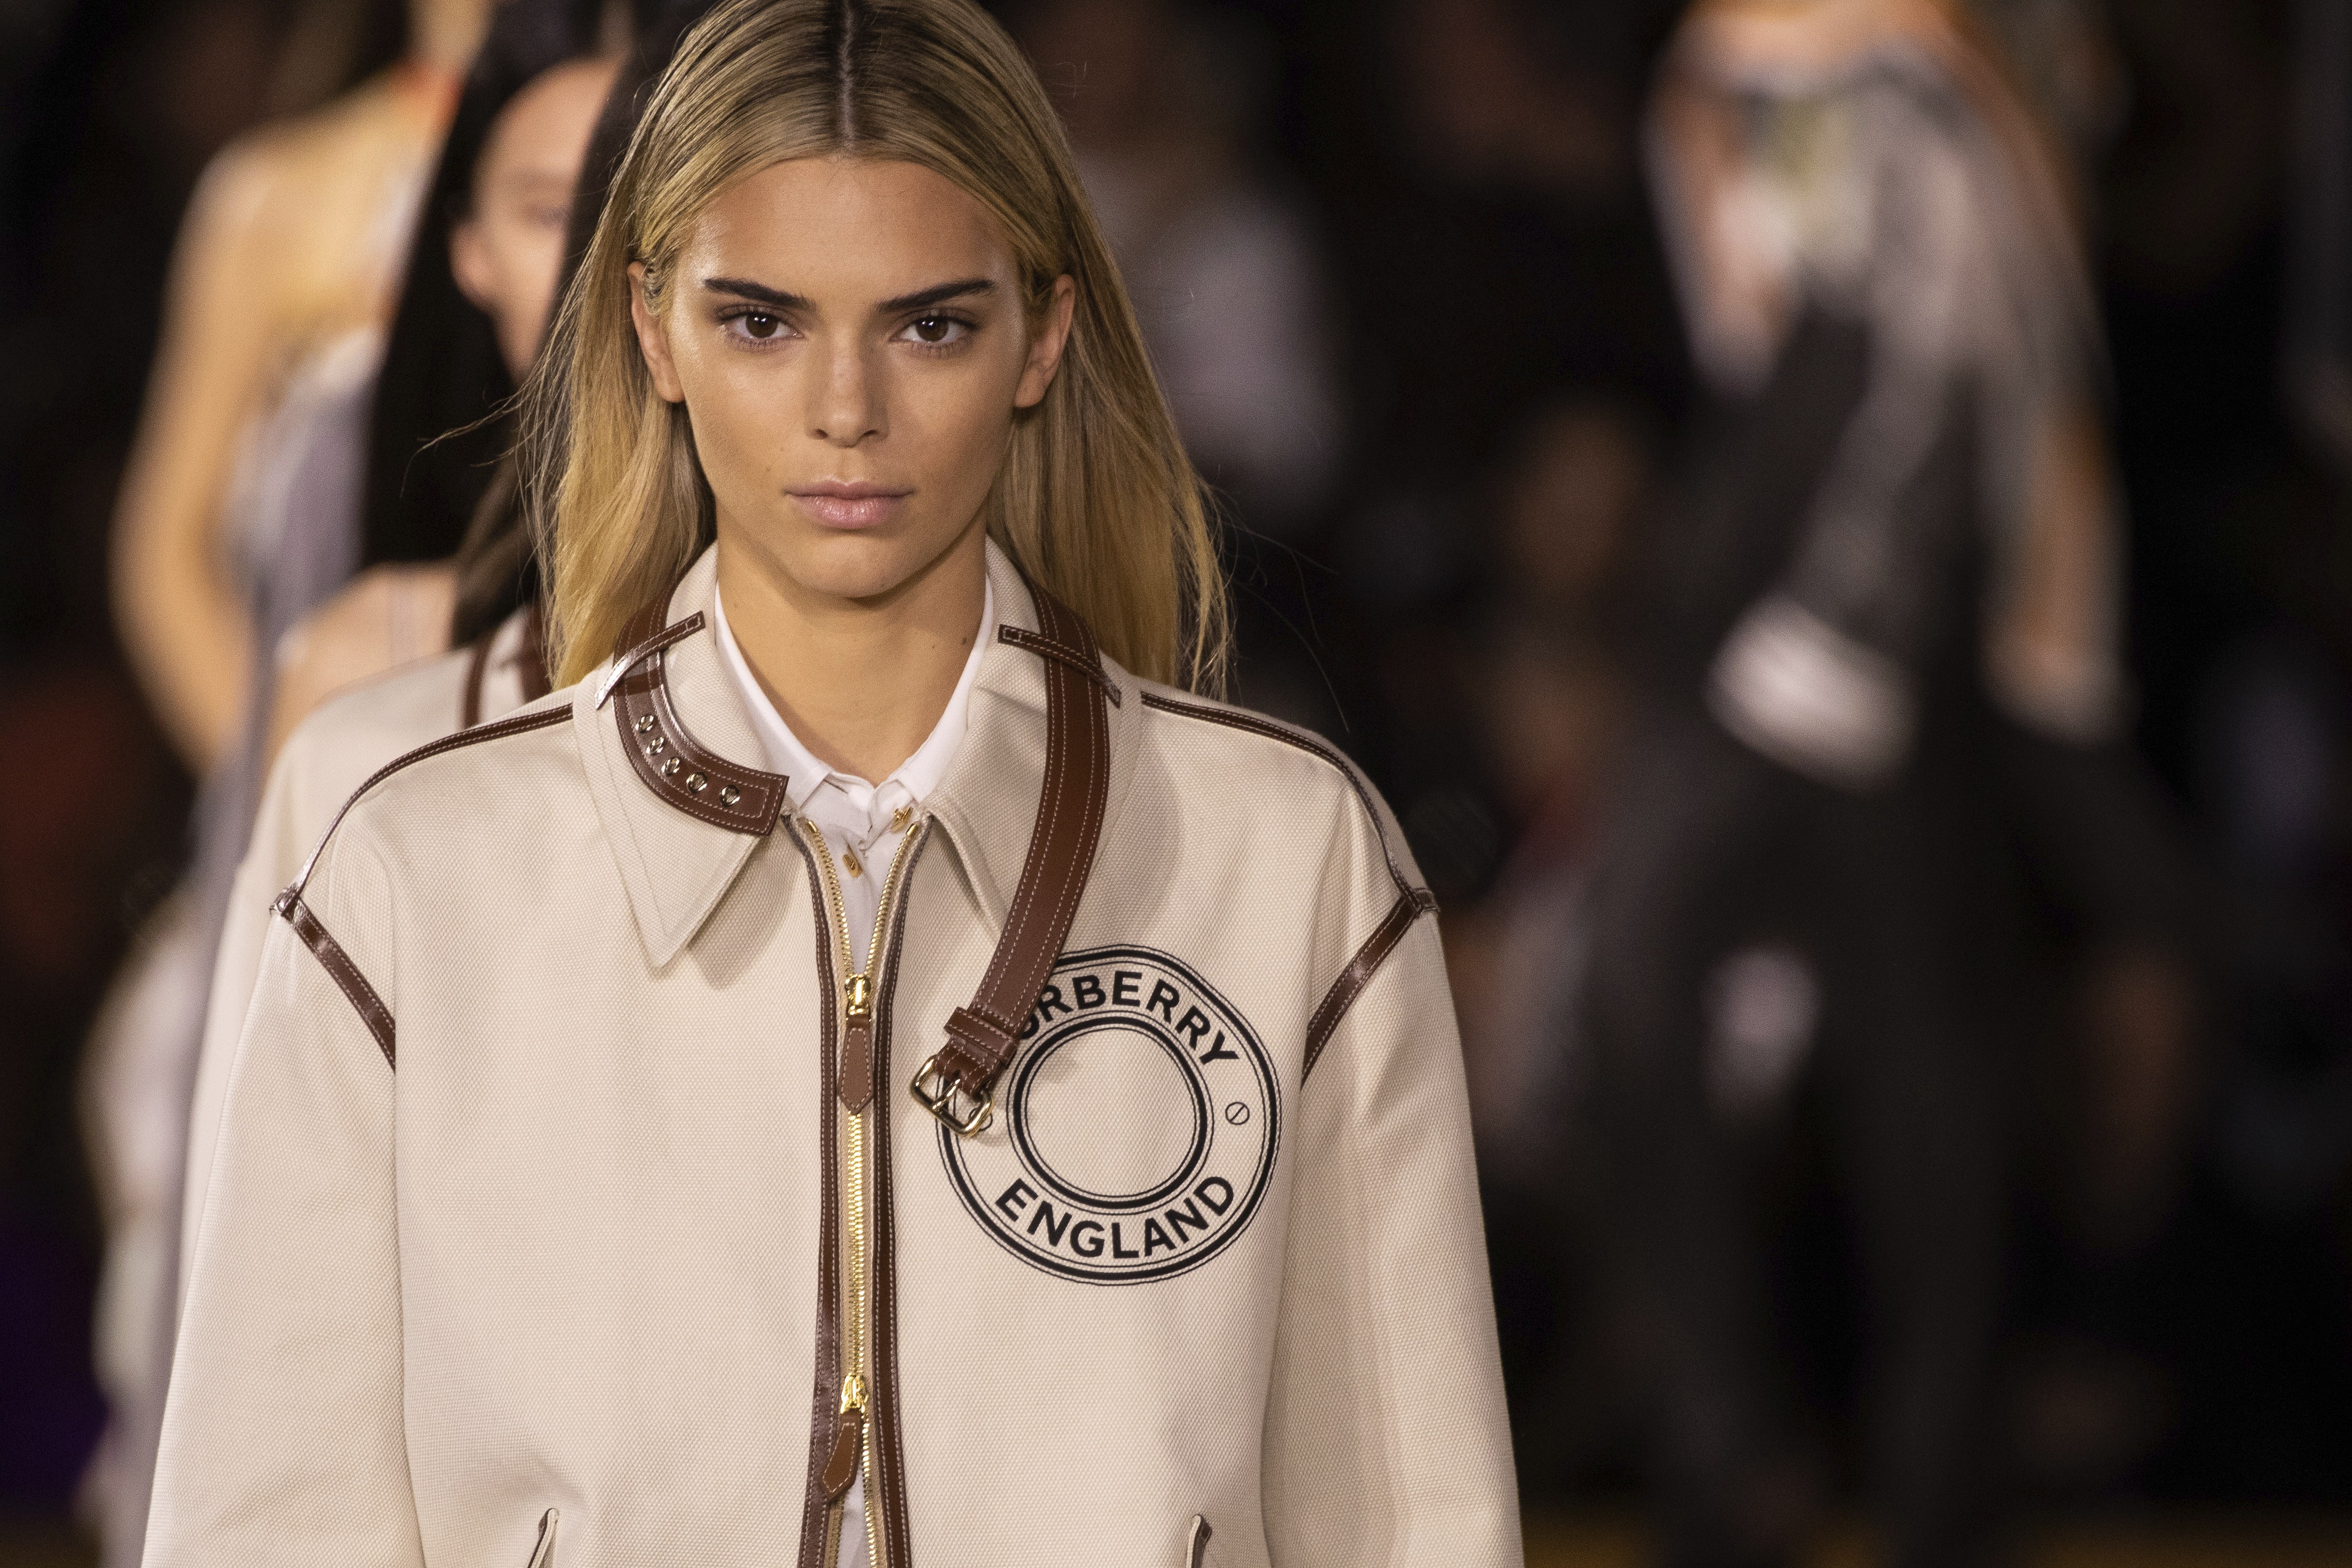 Model Kendall Jenner wears a Burberry creation at the spring/summer 2020 runway show at London Fashion Week. Photo: Invision/AP